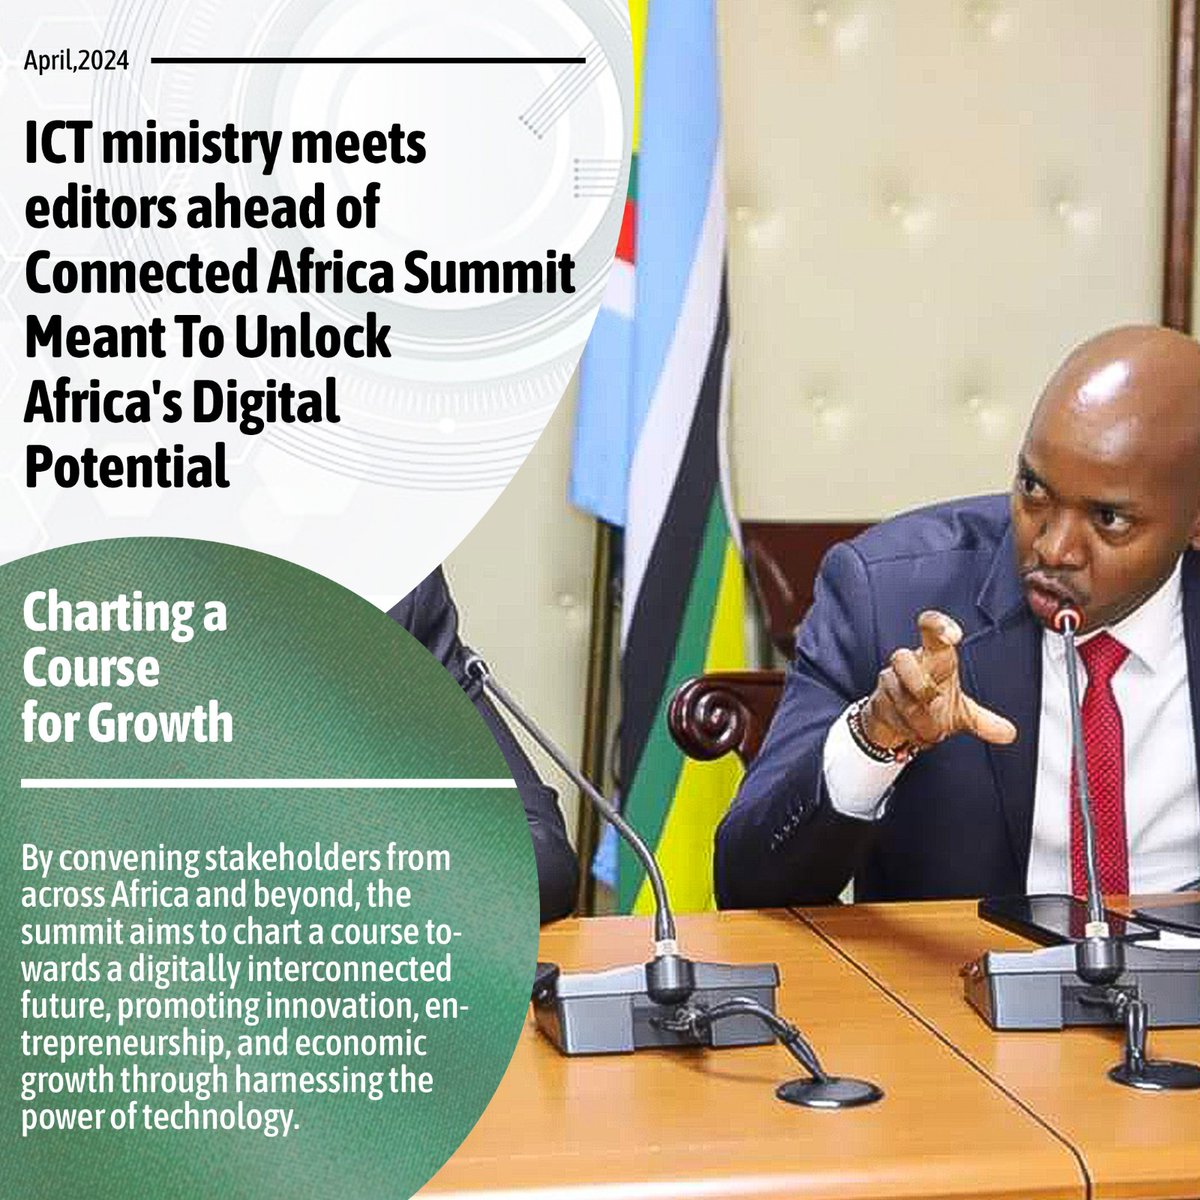 Bringing Africa tech together is a way of charting a way that Africa will grow and unlock the Africa's potential on the Digital potential.
#KenyaKwanzaDelivers.
#Rutoempowers